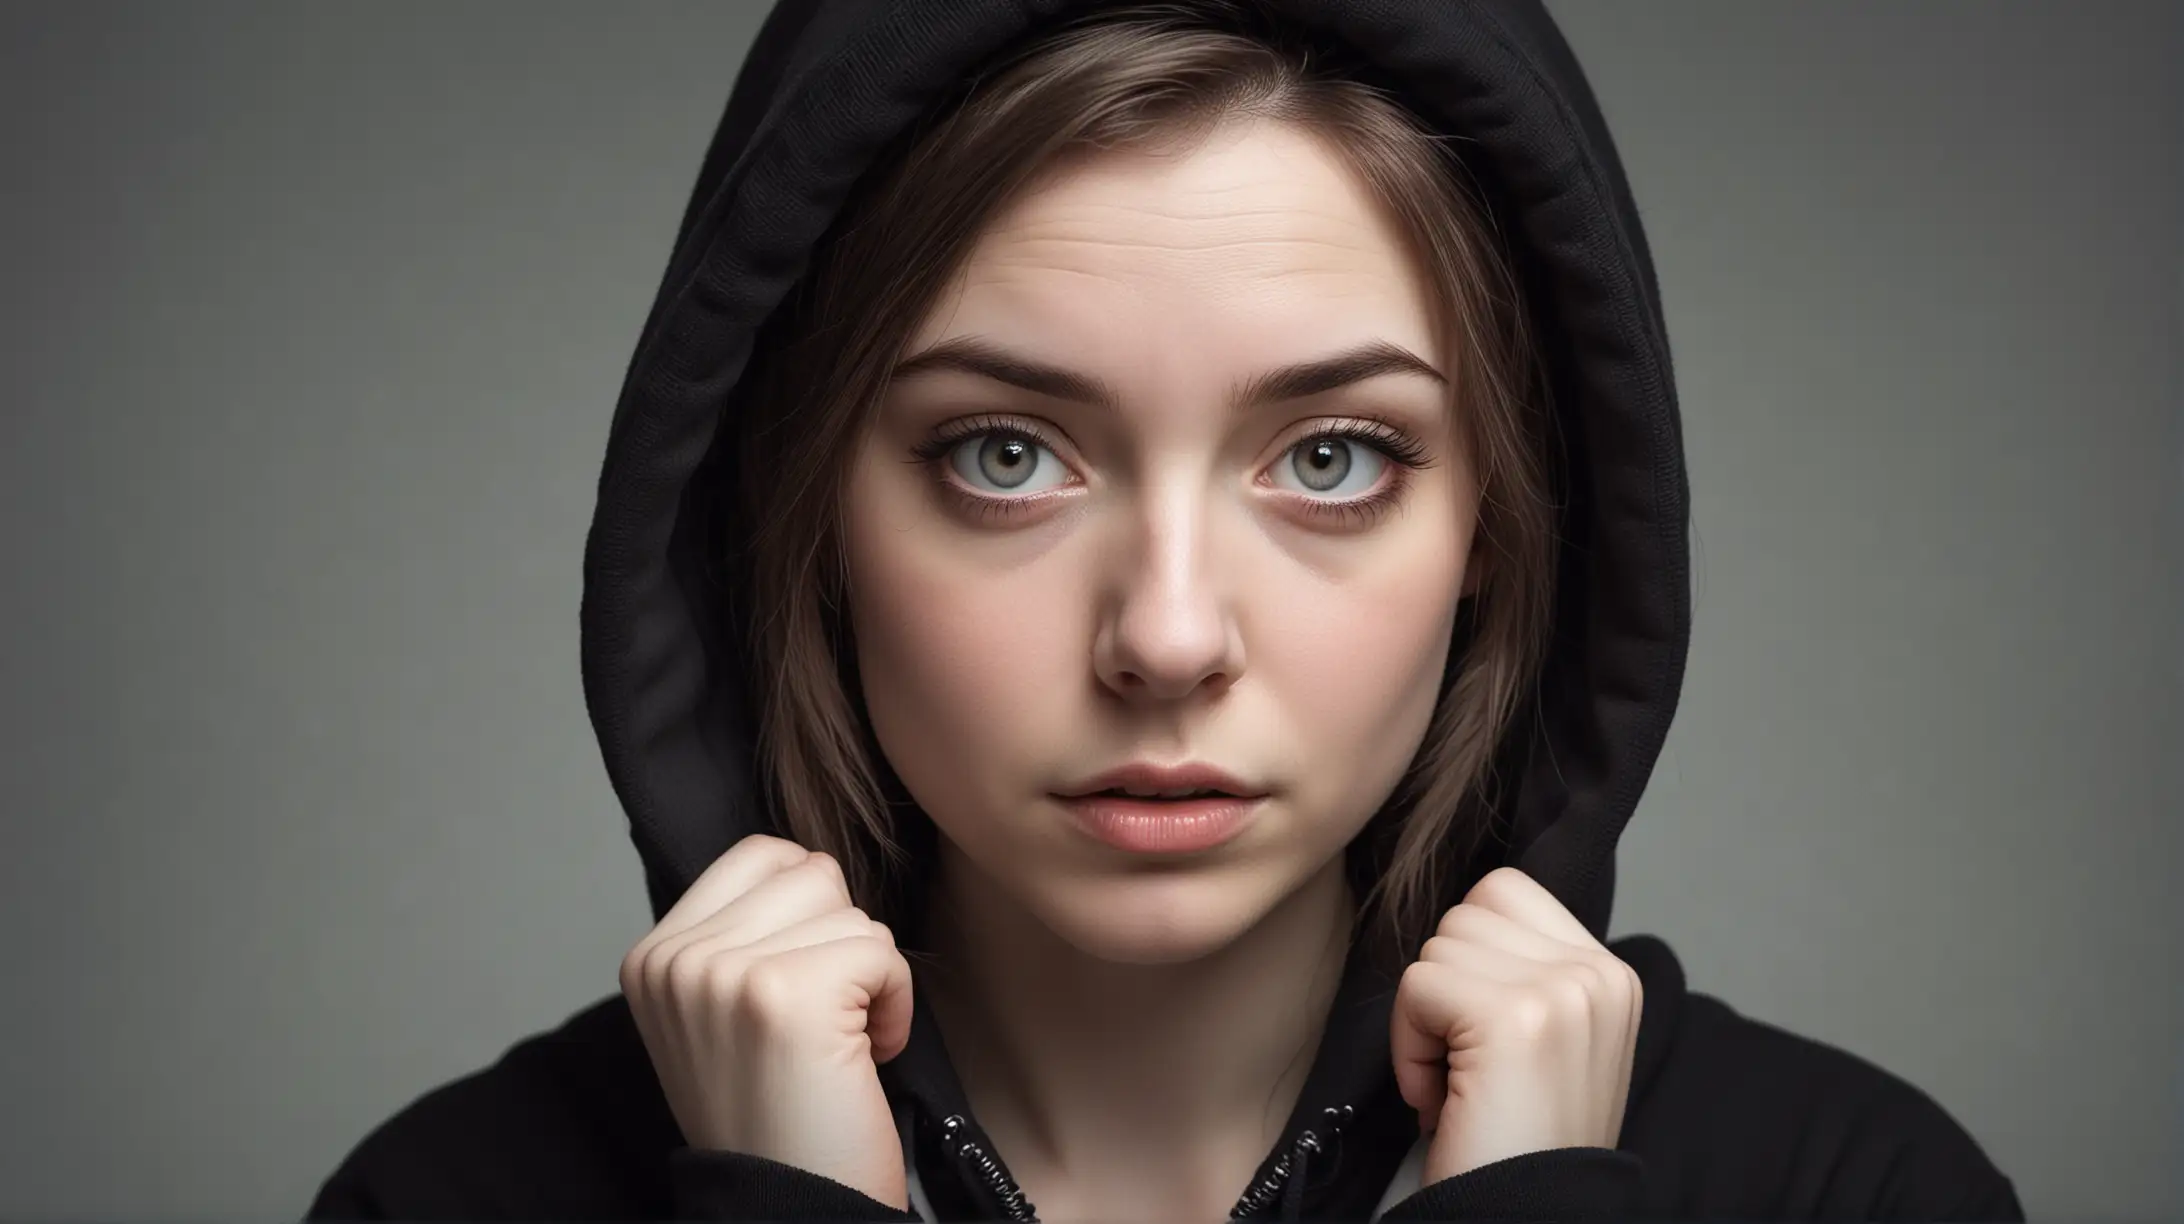 Classic portrait-style photography, nerdy girl, late 20's, black hoodie down, porcelain white skin, intelligent, shy, terrified eyes, photo realistic, cinematic lighting